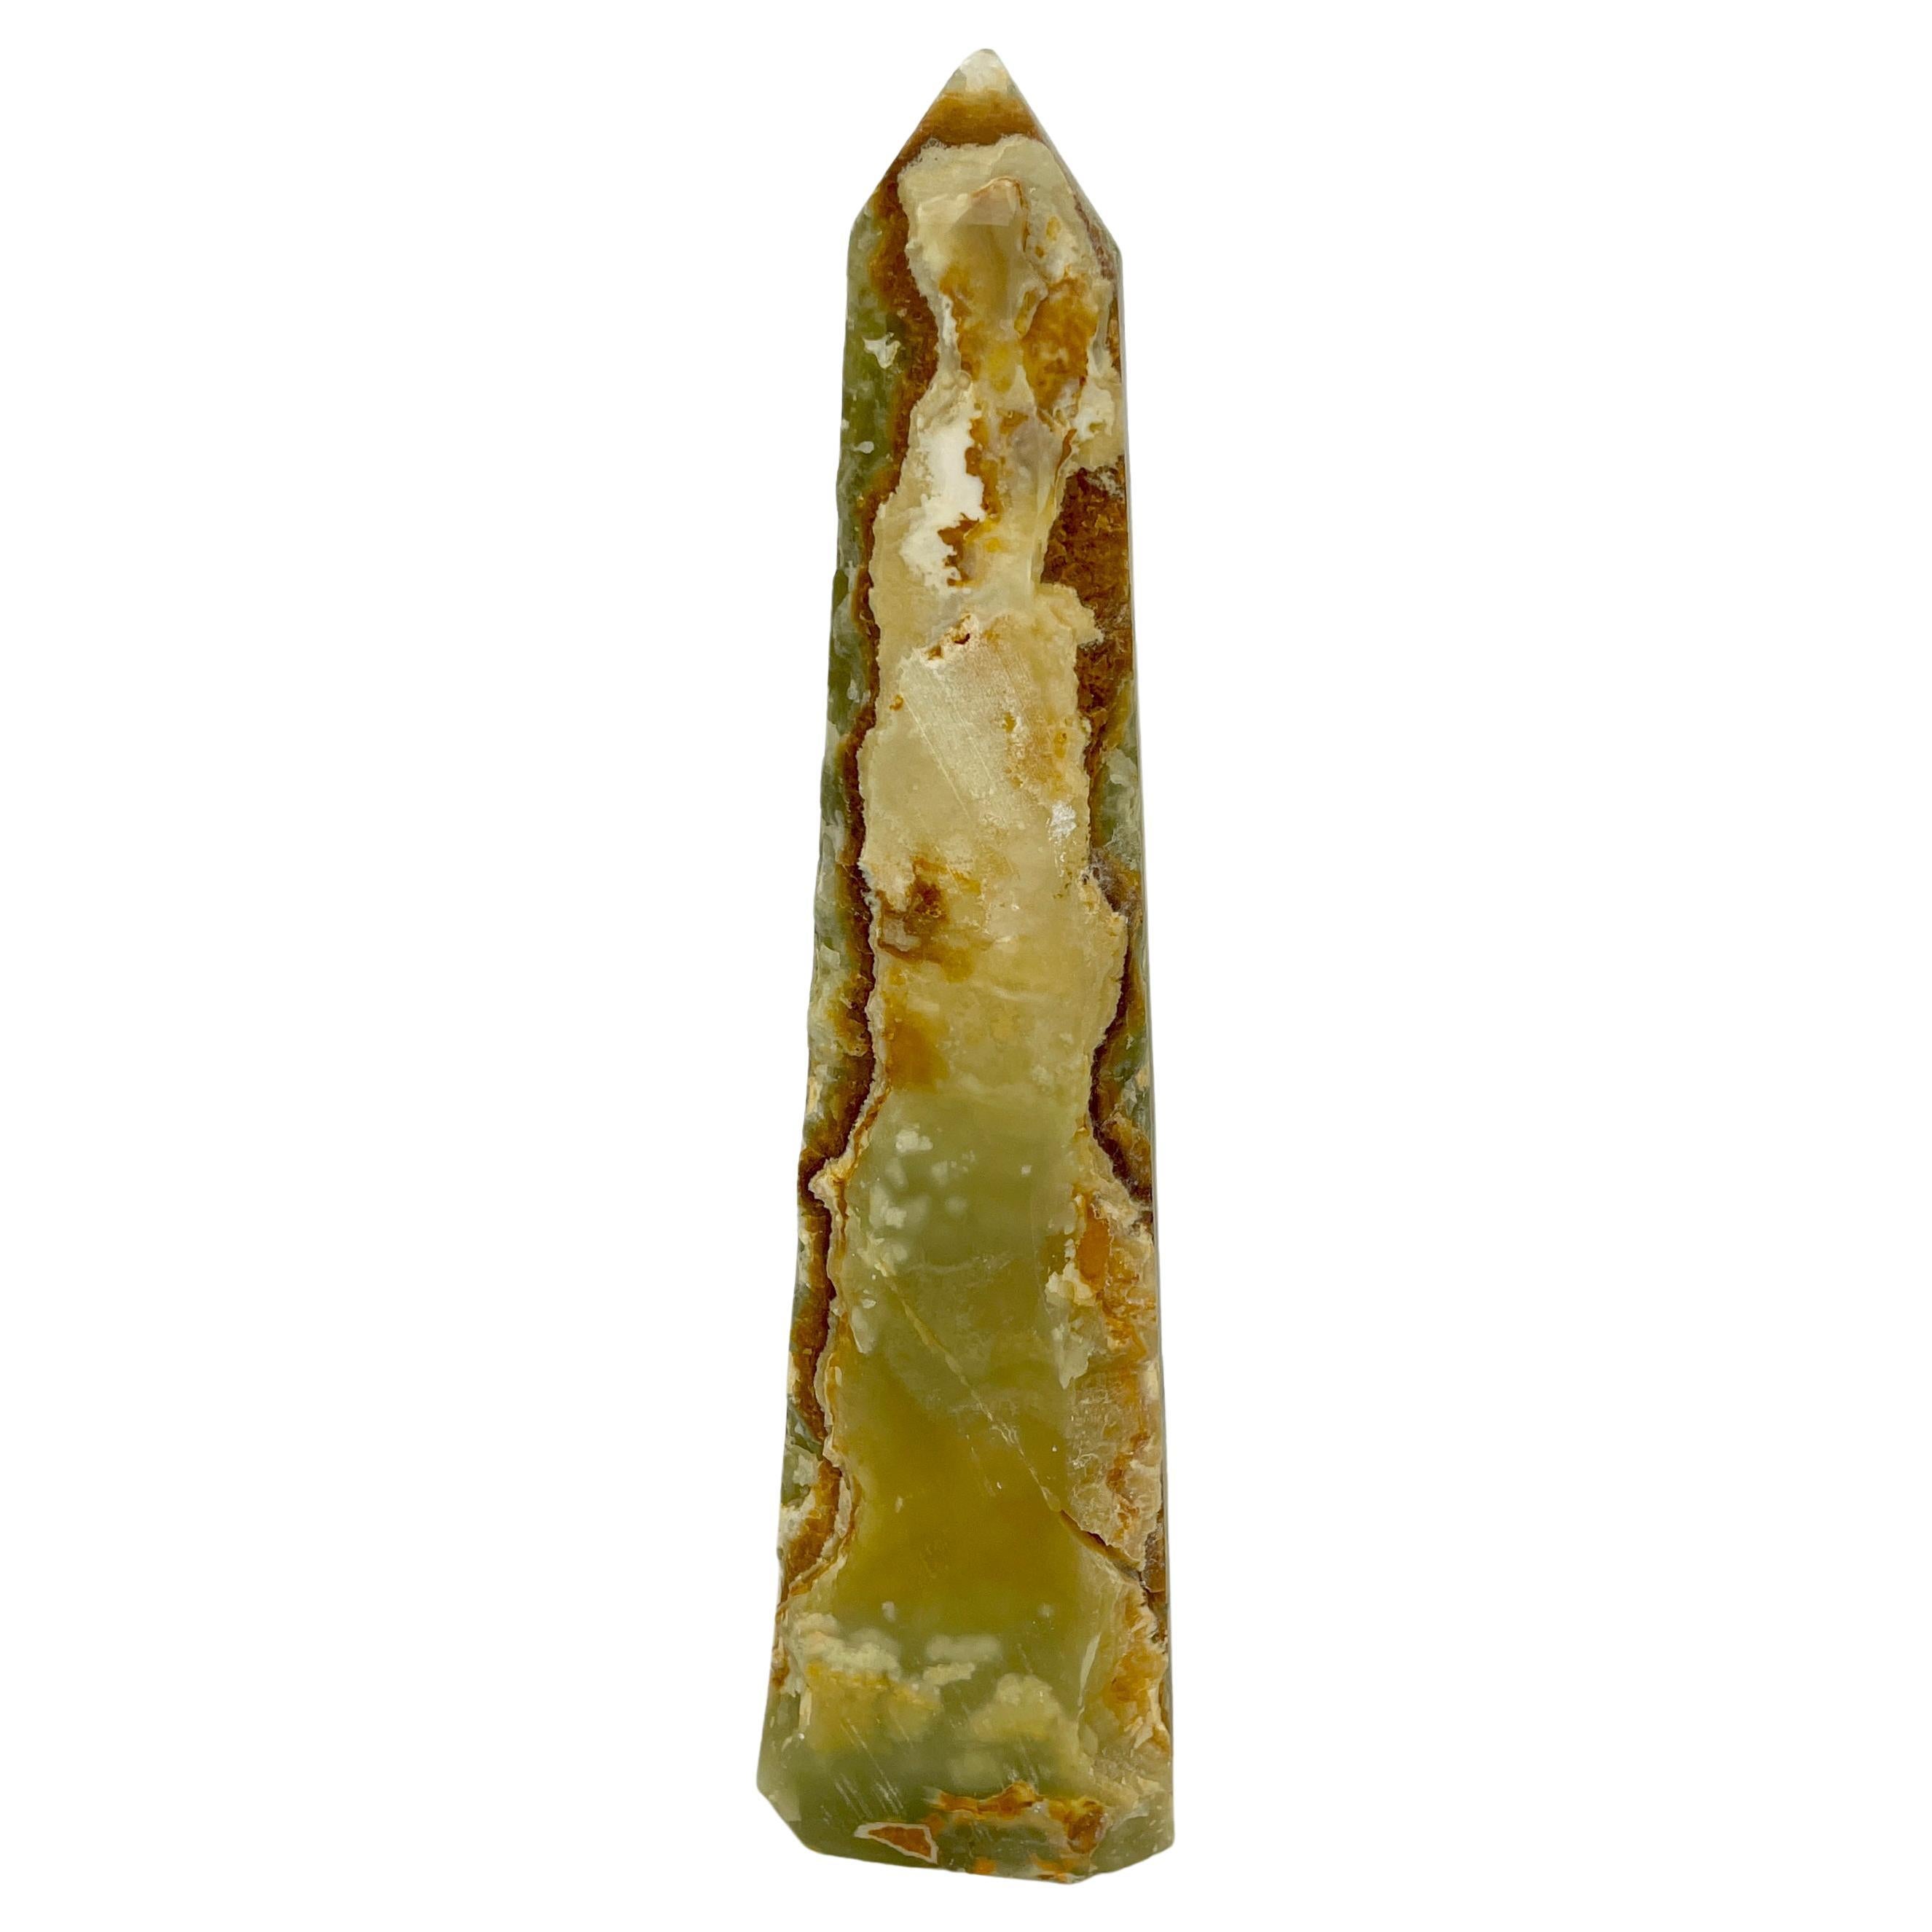 Vintage Obelisk in Green Onyx With Natural Rough Edge Finish